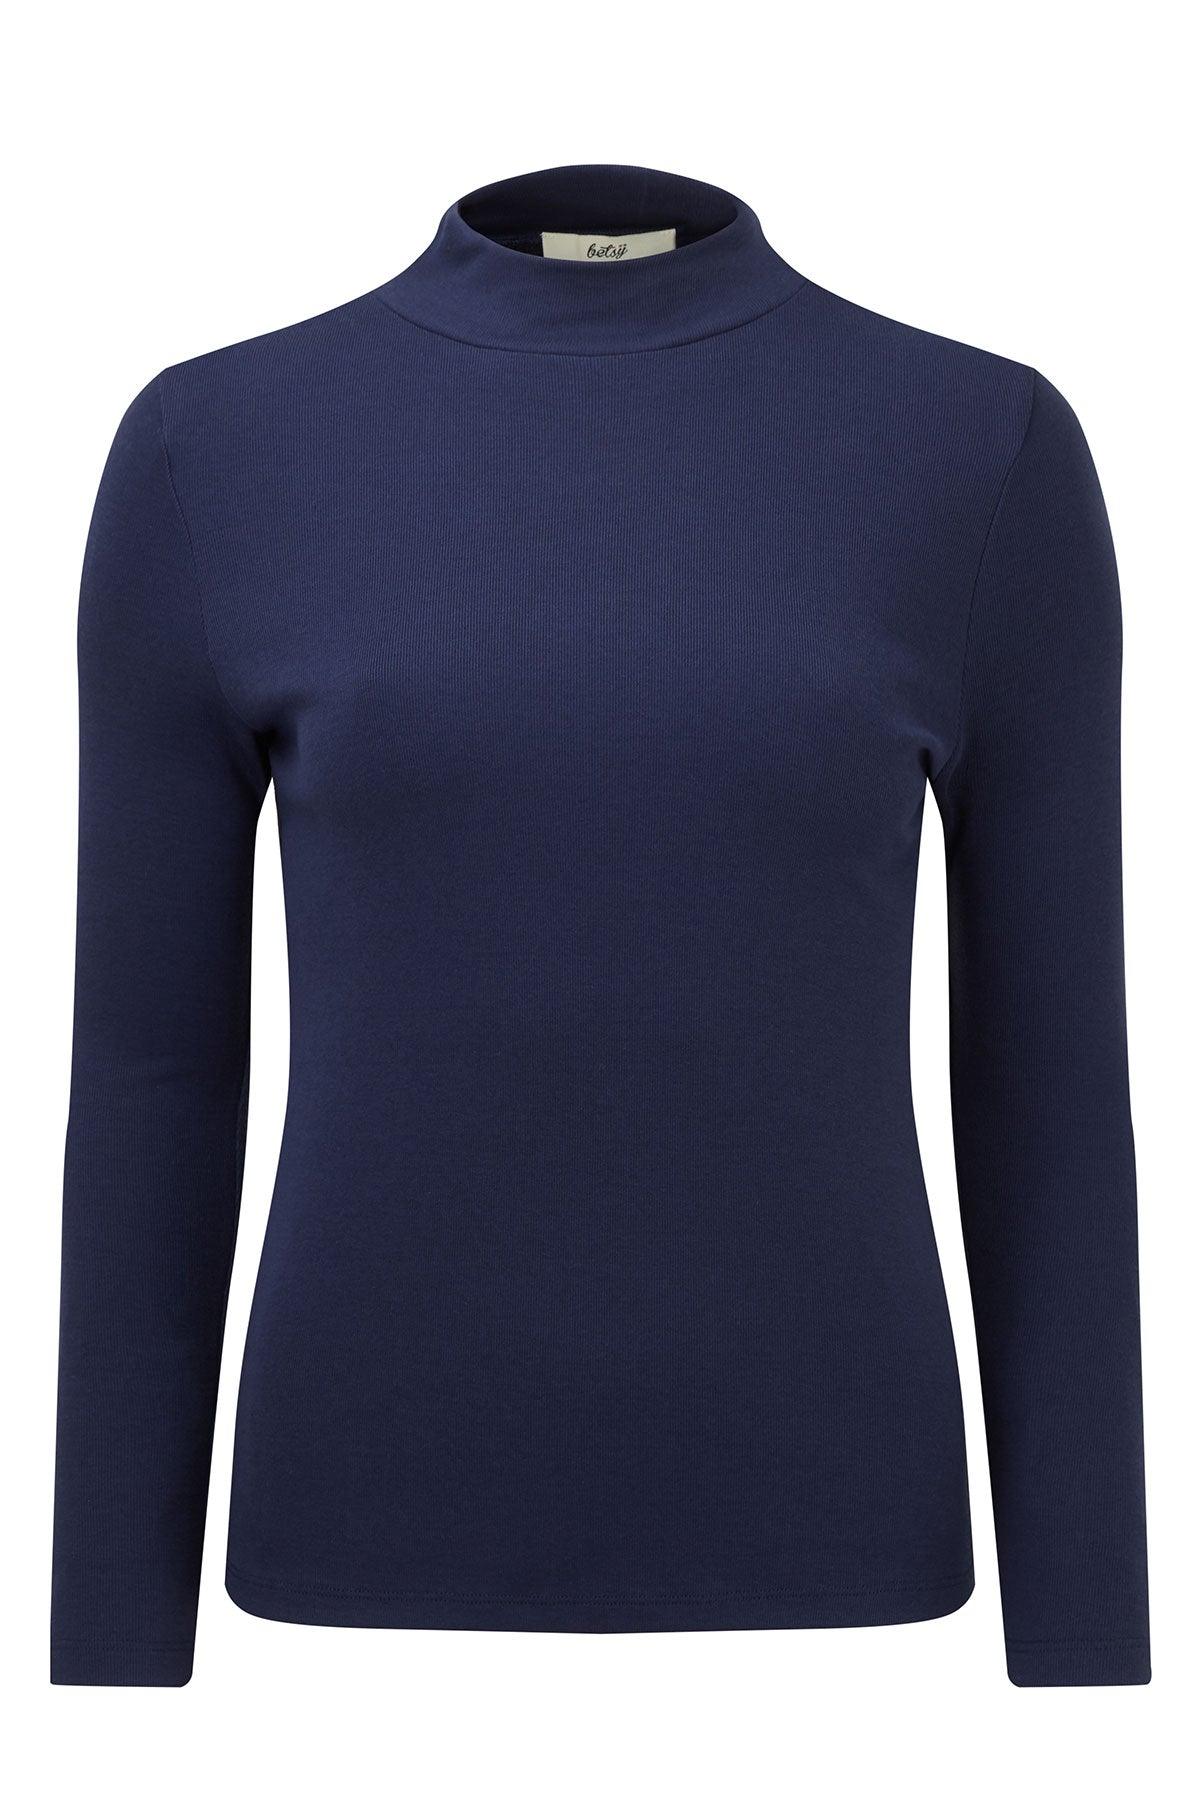 Betsy Turtle Neck Top (Navy)